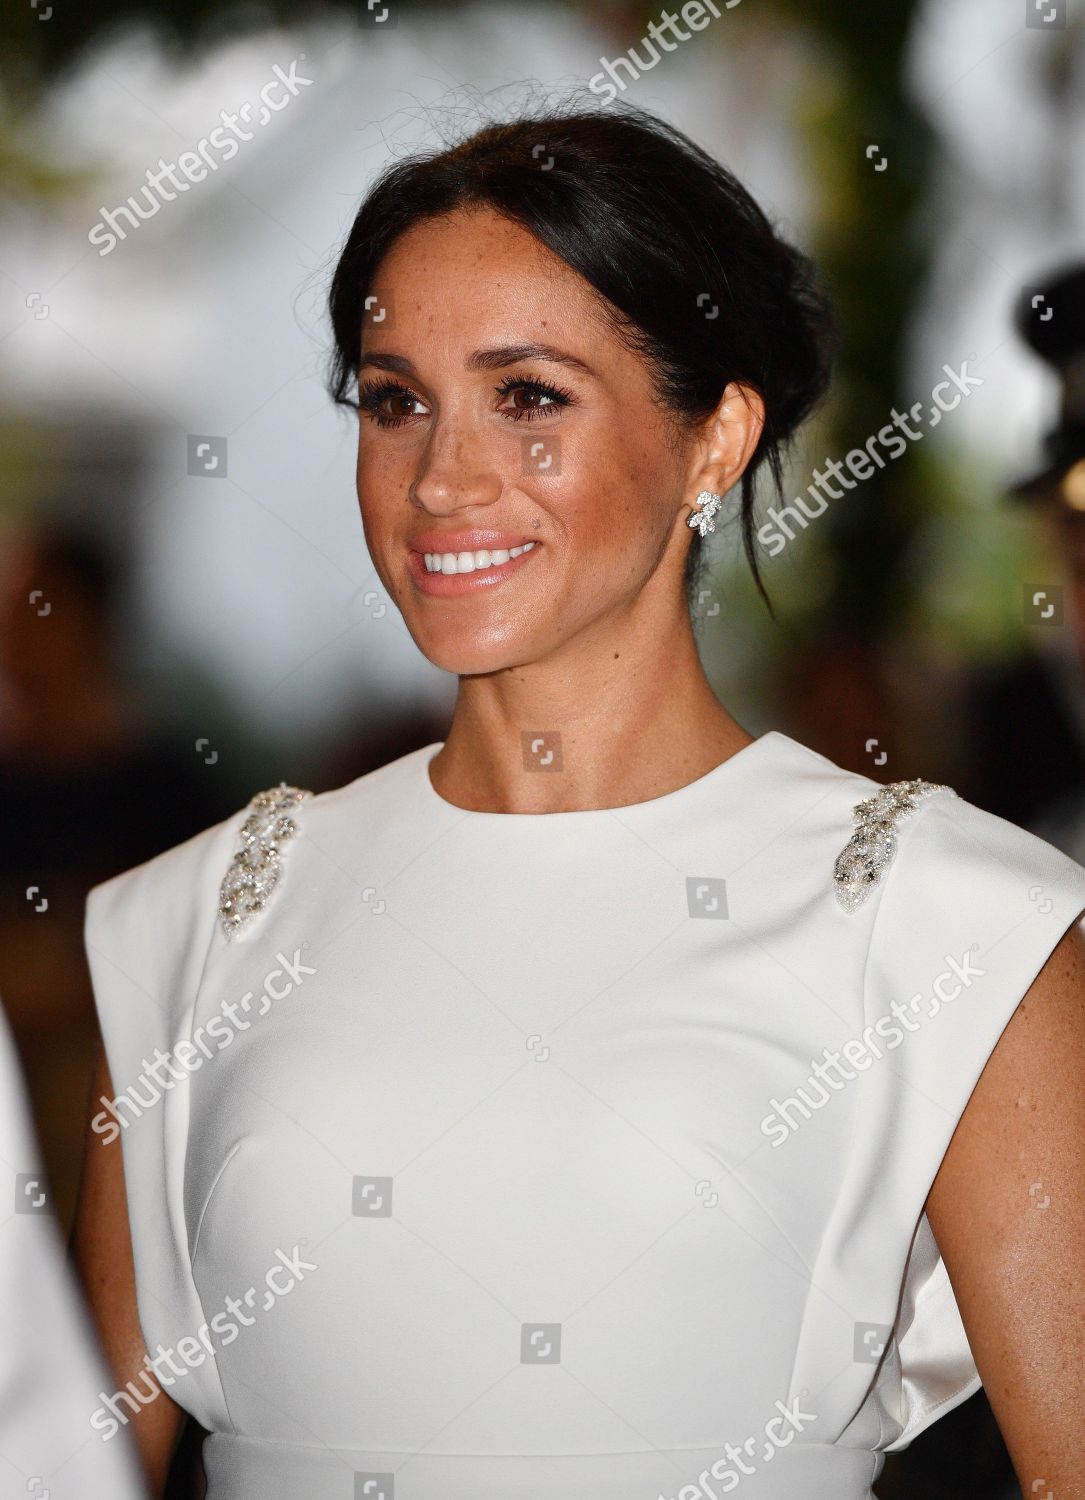 prince-harry-and-meghan-duchess-of-sussex-tour-of-tonga-shutterstock-editorial-9943917au.jpg